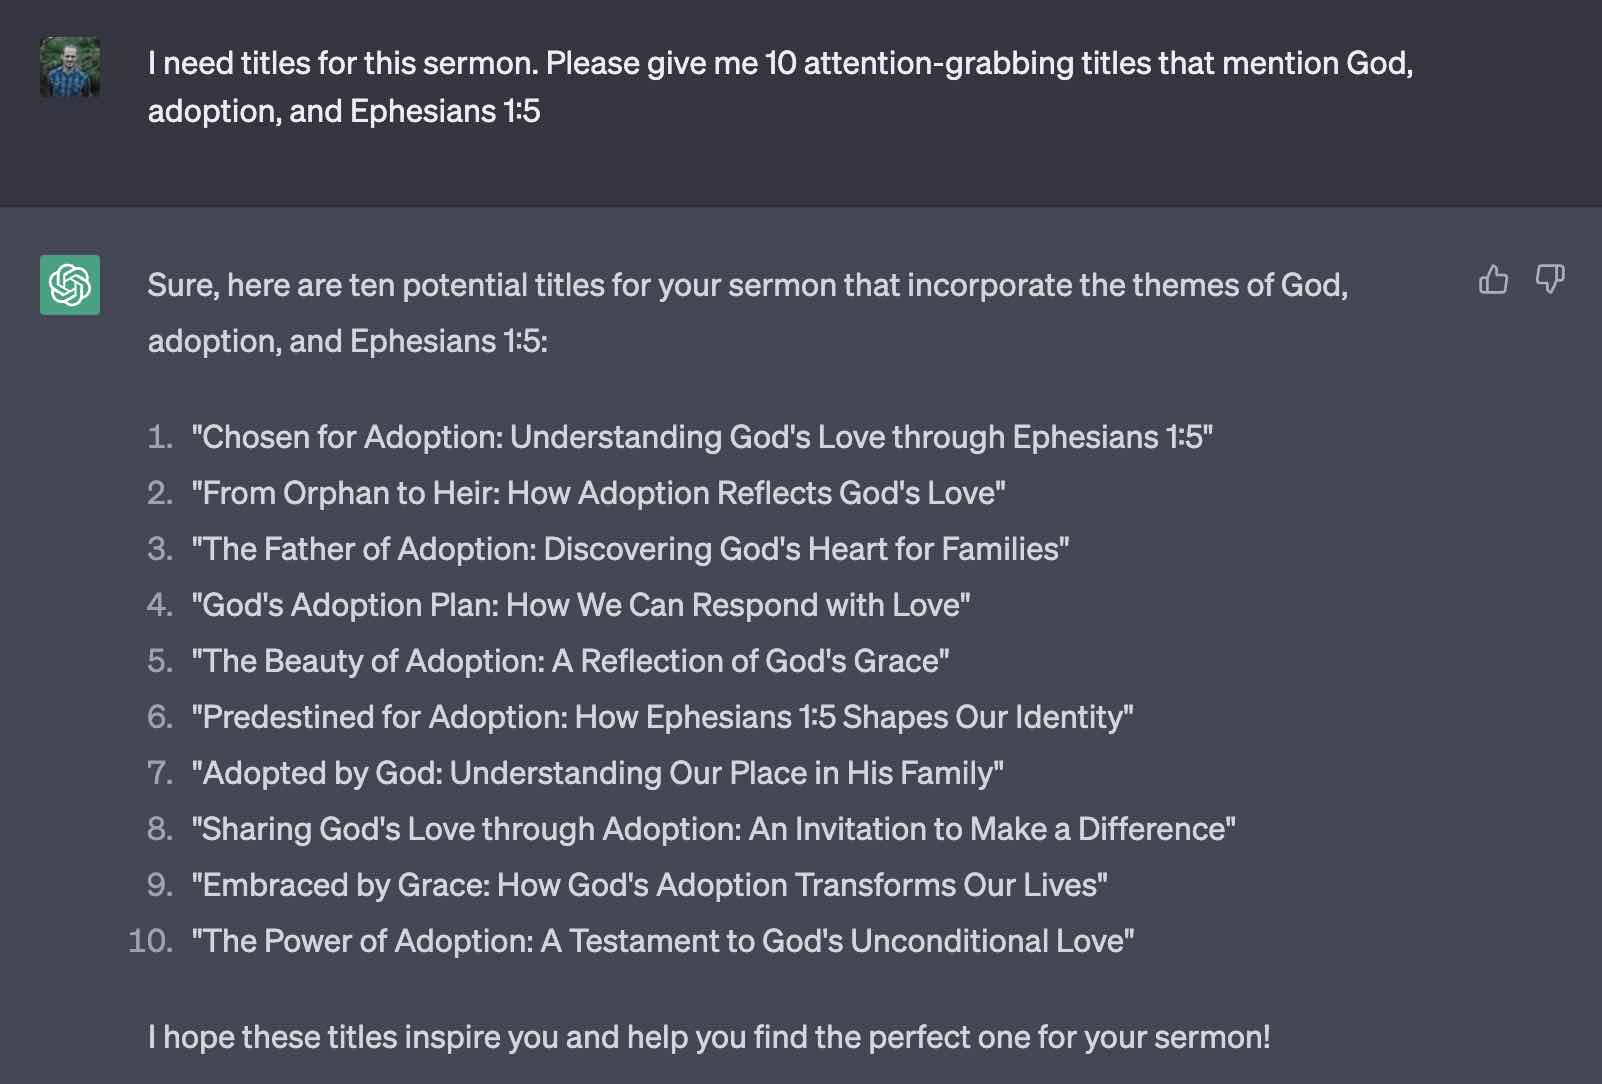 Chat GPT can create several titles for your sermon to choose from